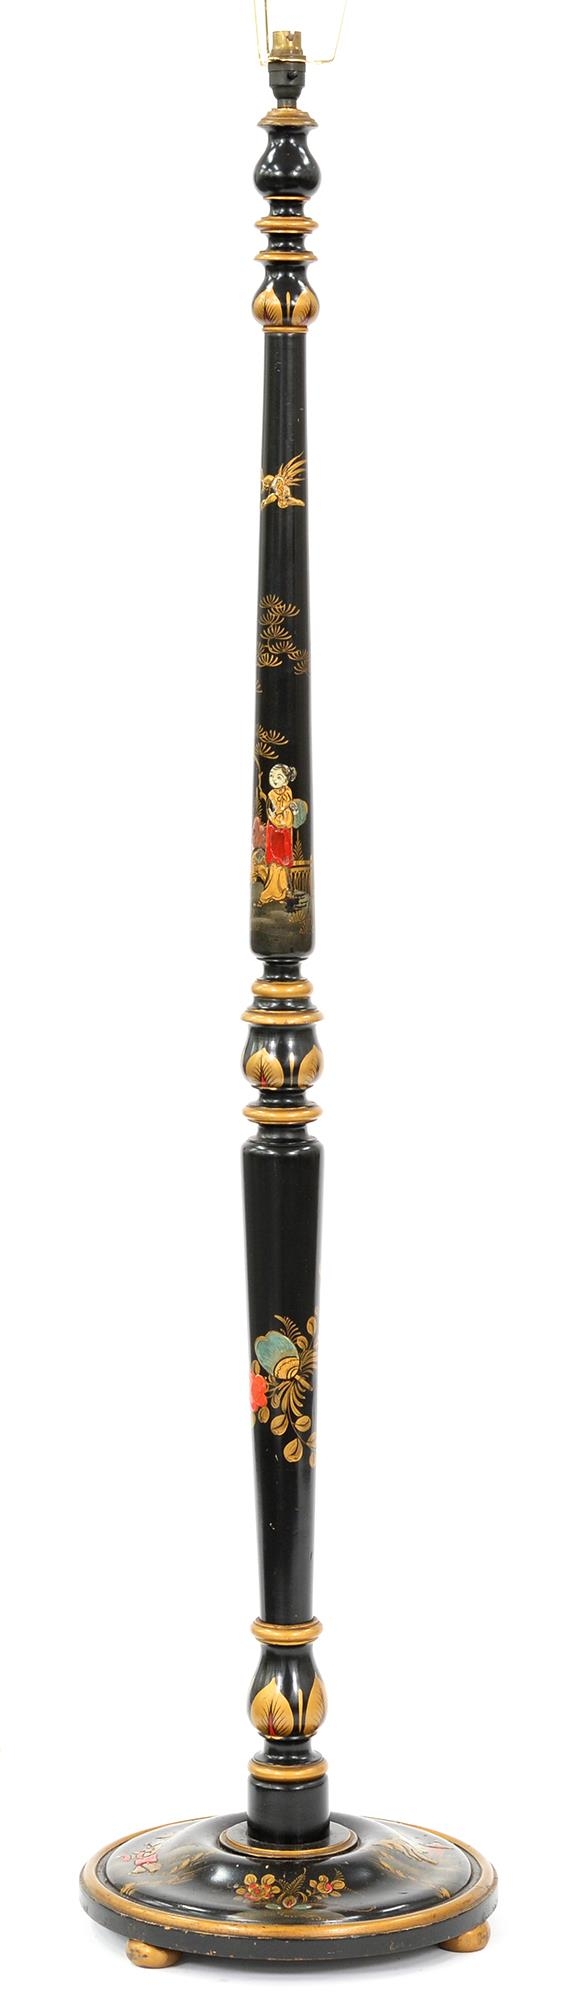 A turned wood and black japanned standard lamp, c1930, decorated with chinoiseries, 152cm h